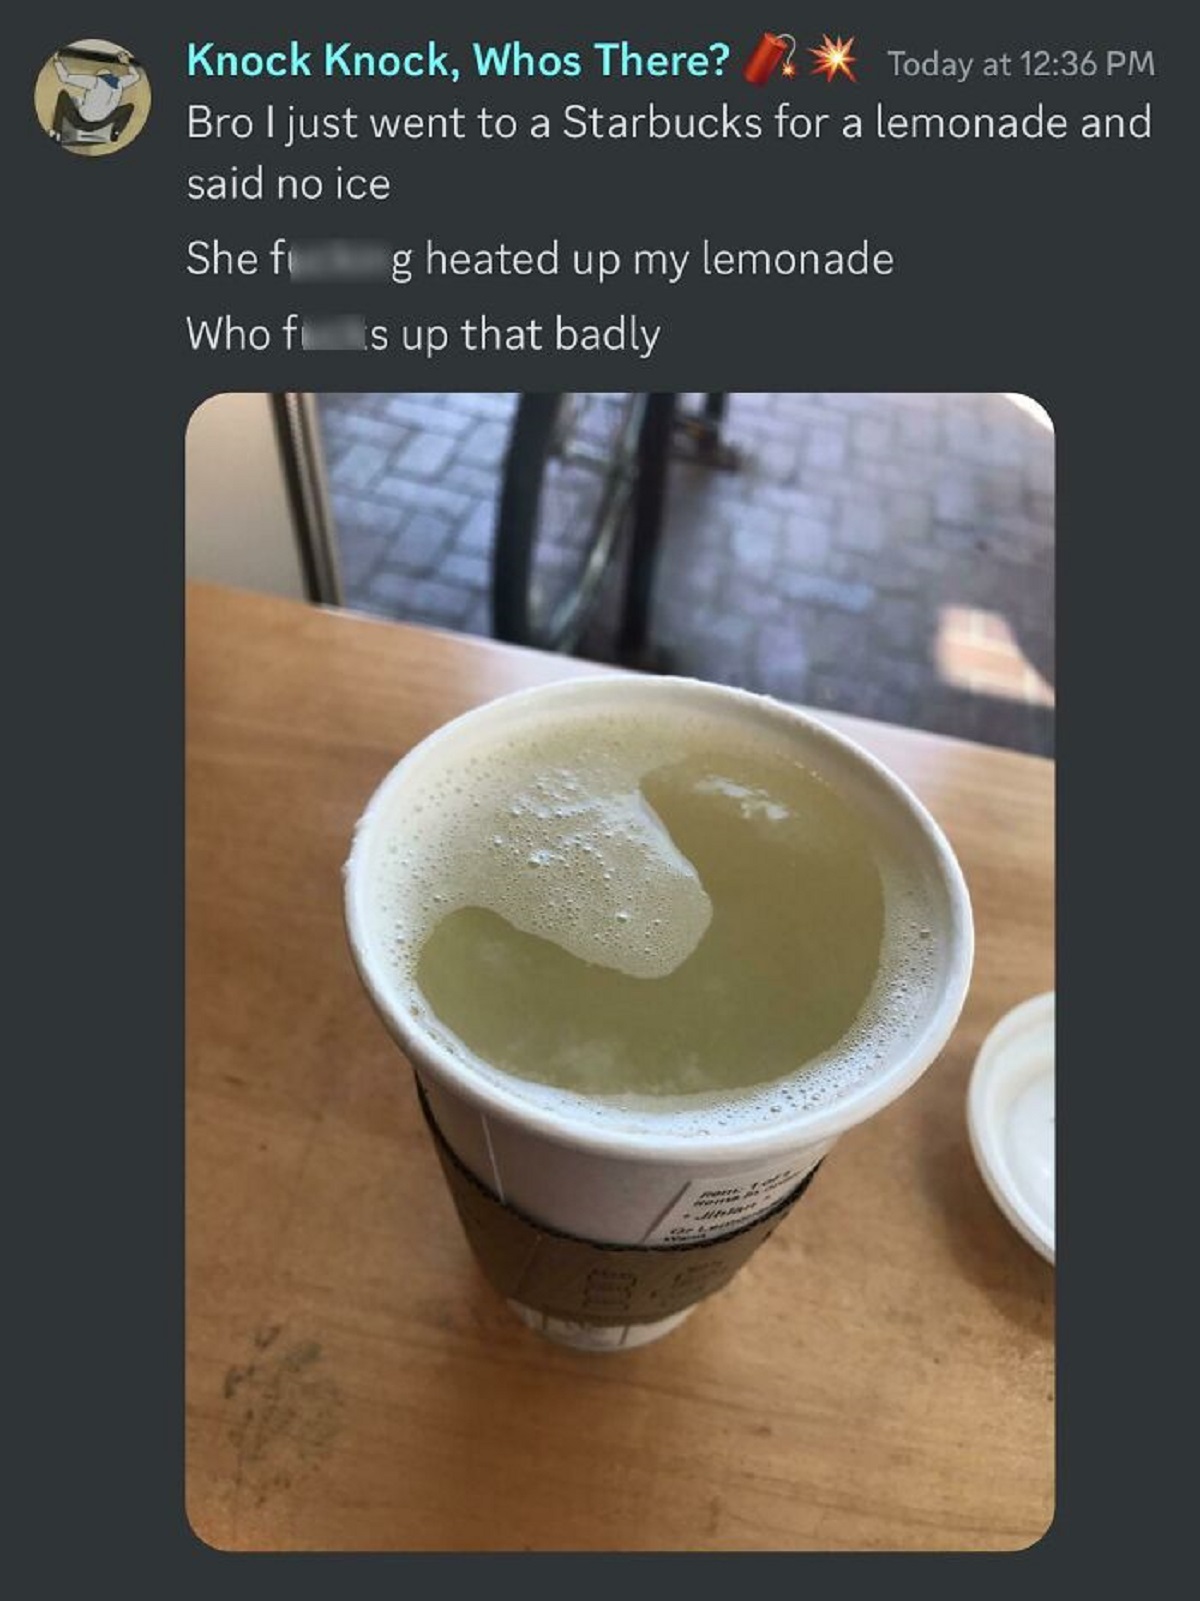 sikhye - Knock Knock, Whos There? Today at Bro I just went to a Starbucks for a lemonade and said no ice She f g heated up my lemonade Who fi is up that badly